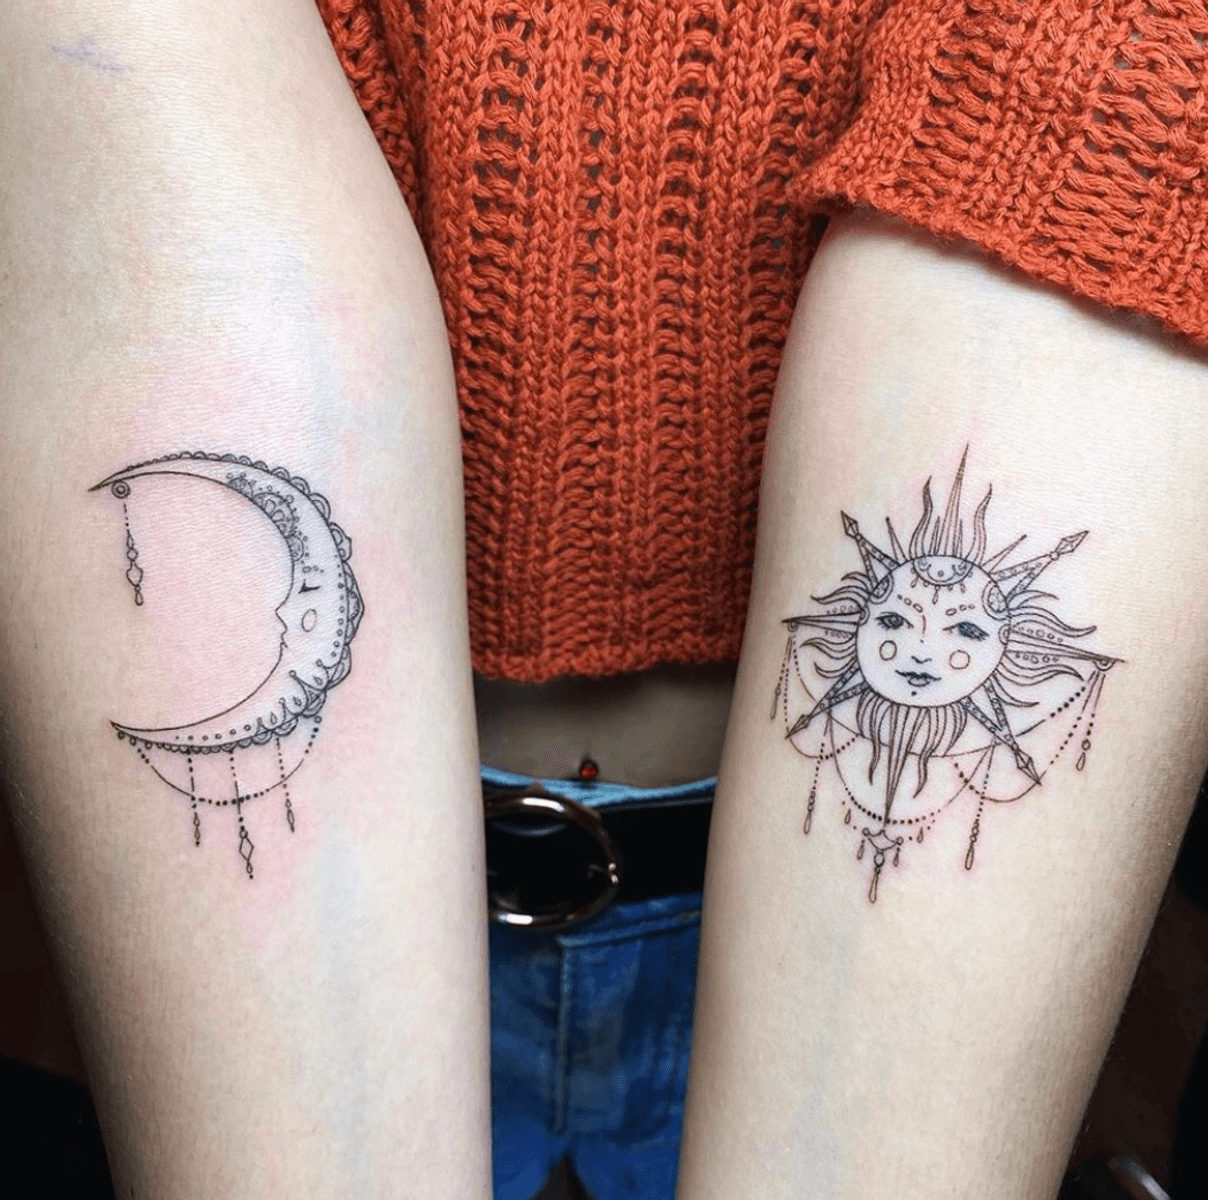 Tattoo uploaded by Black Fish Tattoo • Sun and moon by Chris. Insta ...